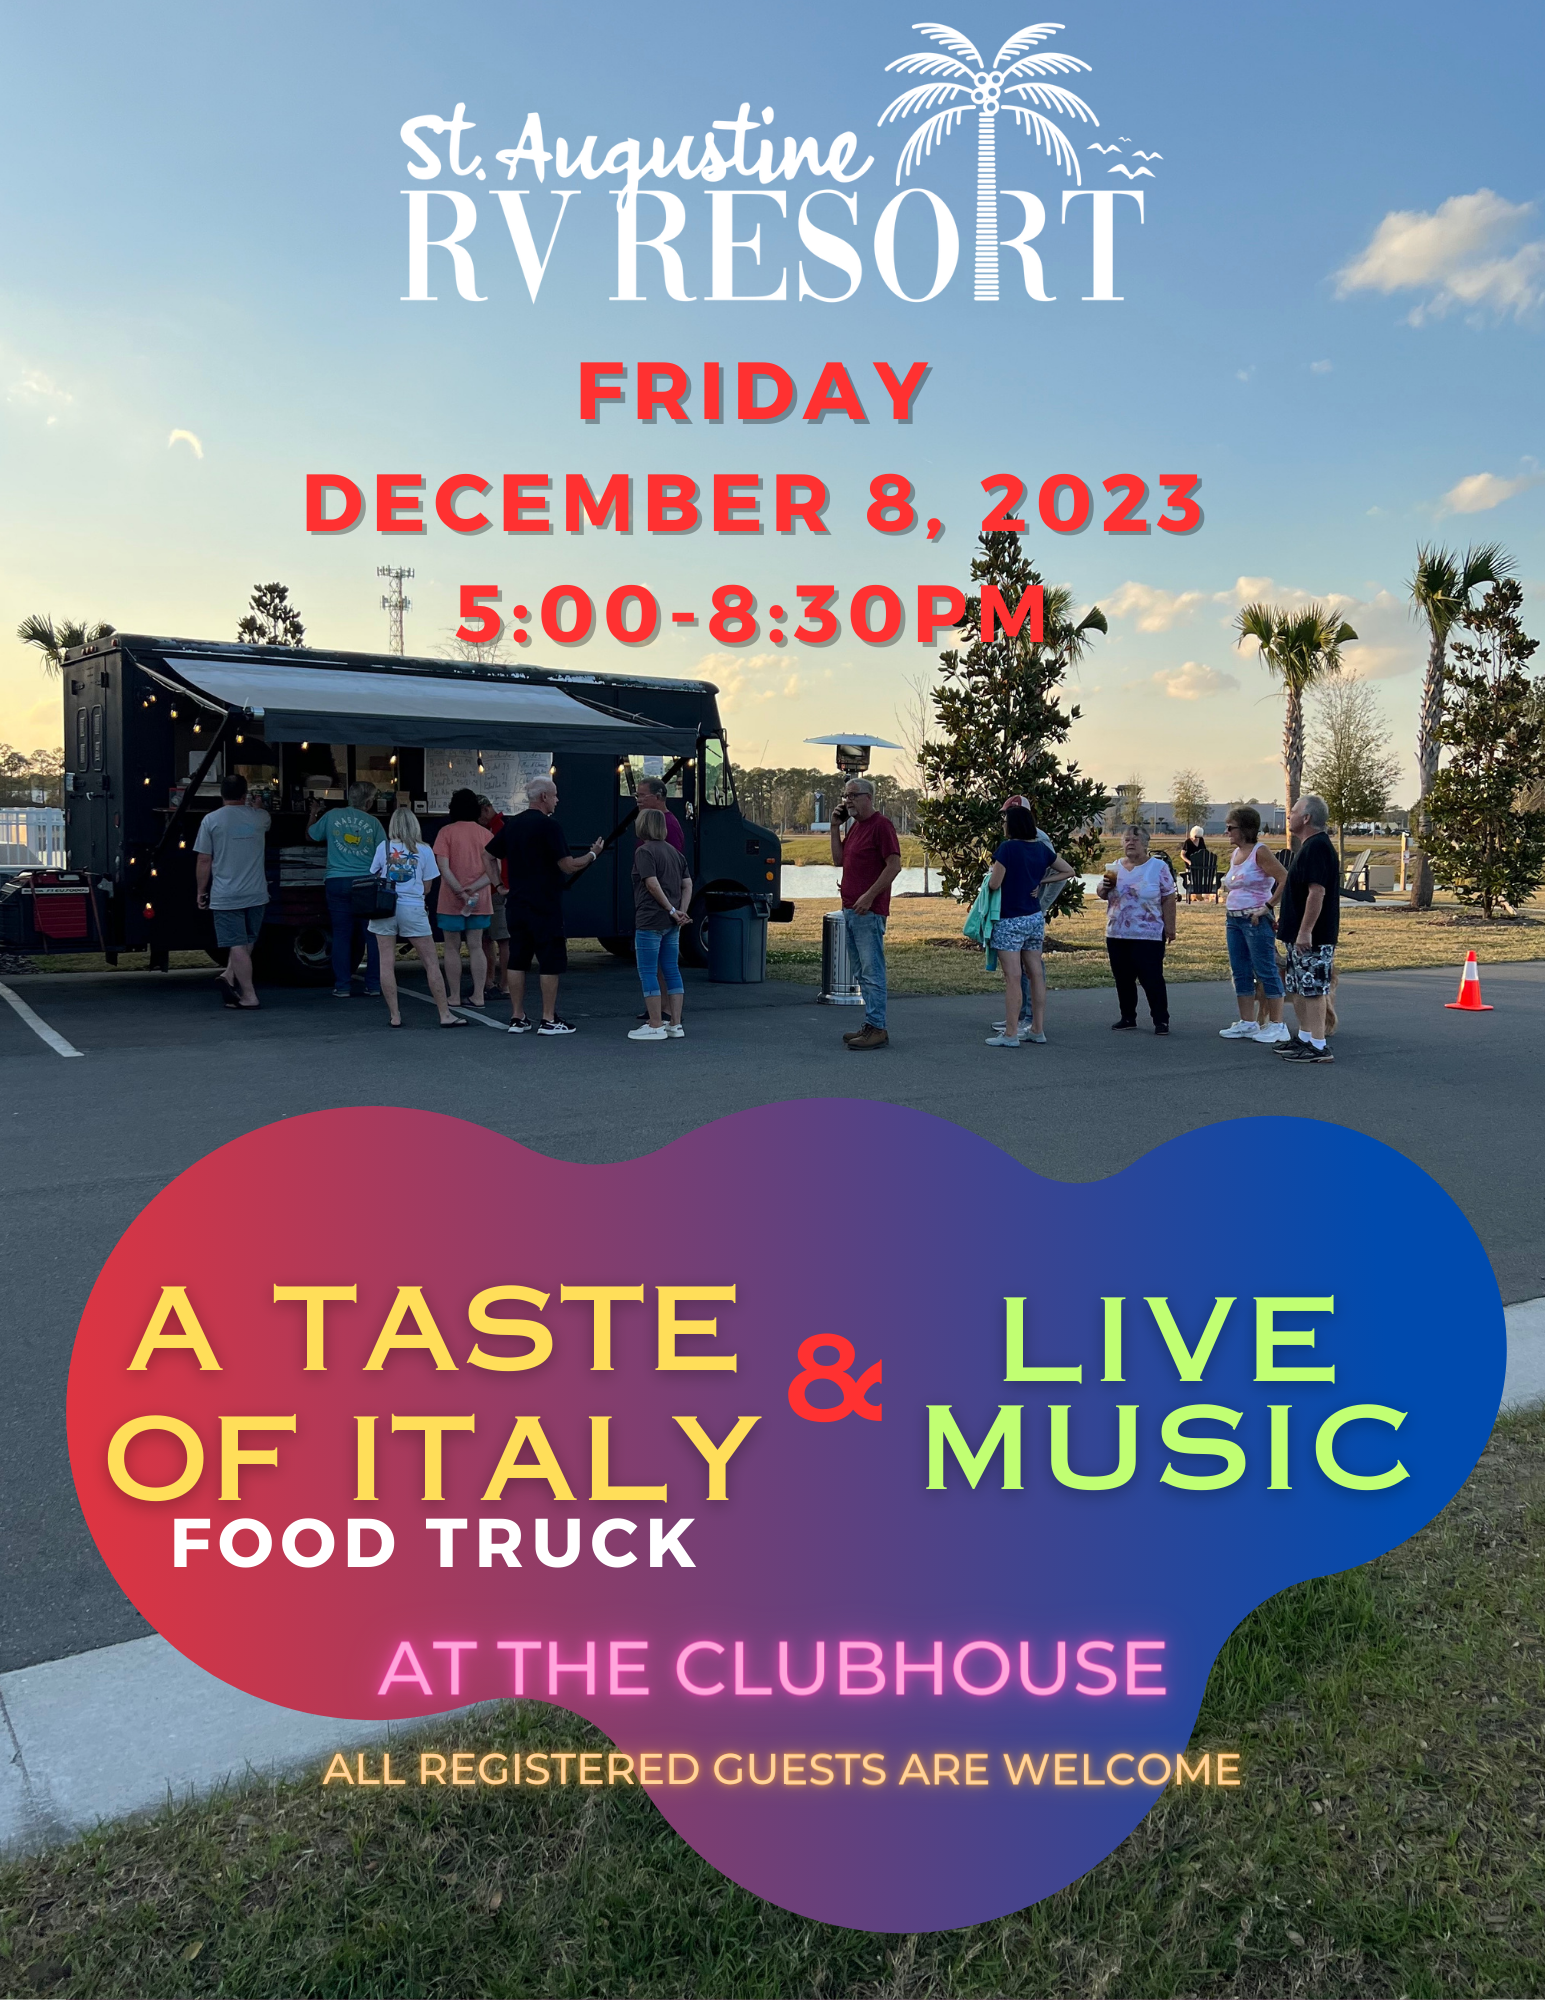 Food truck & live music Friday 12/8 5-8:30pm